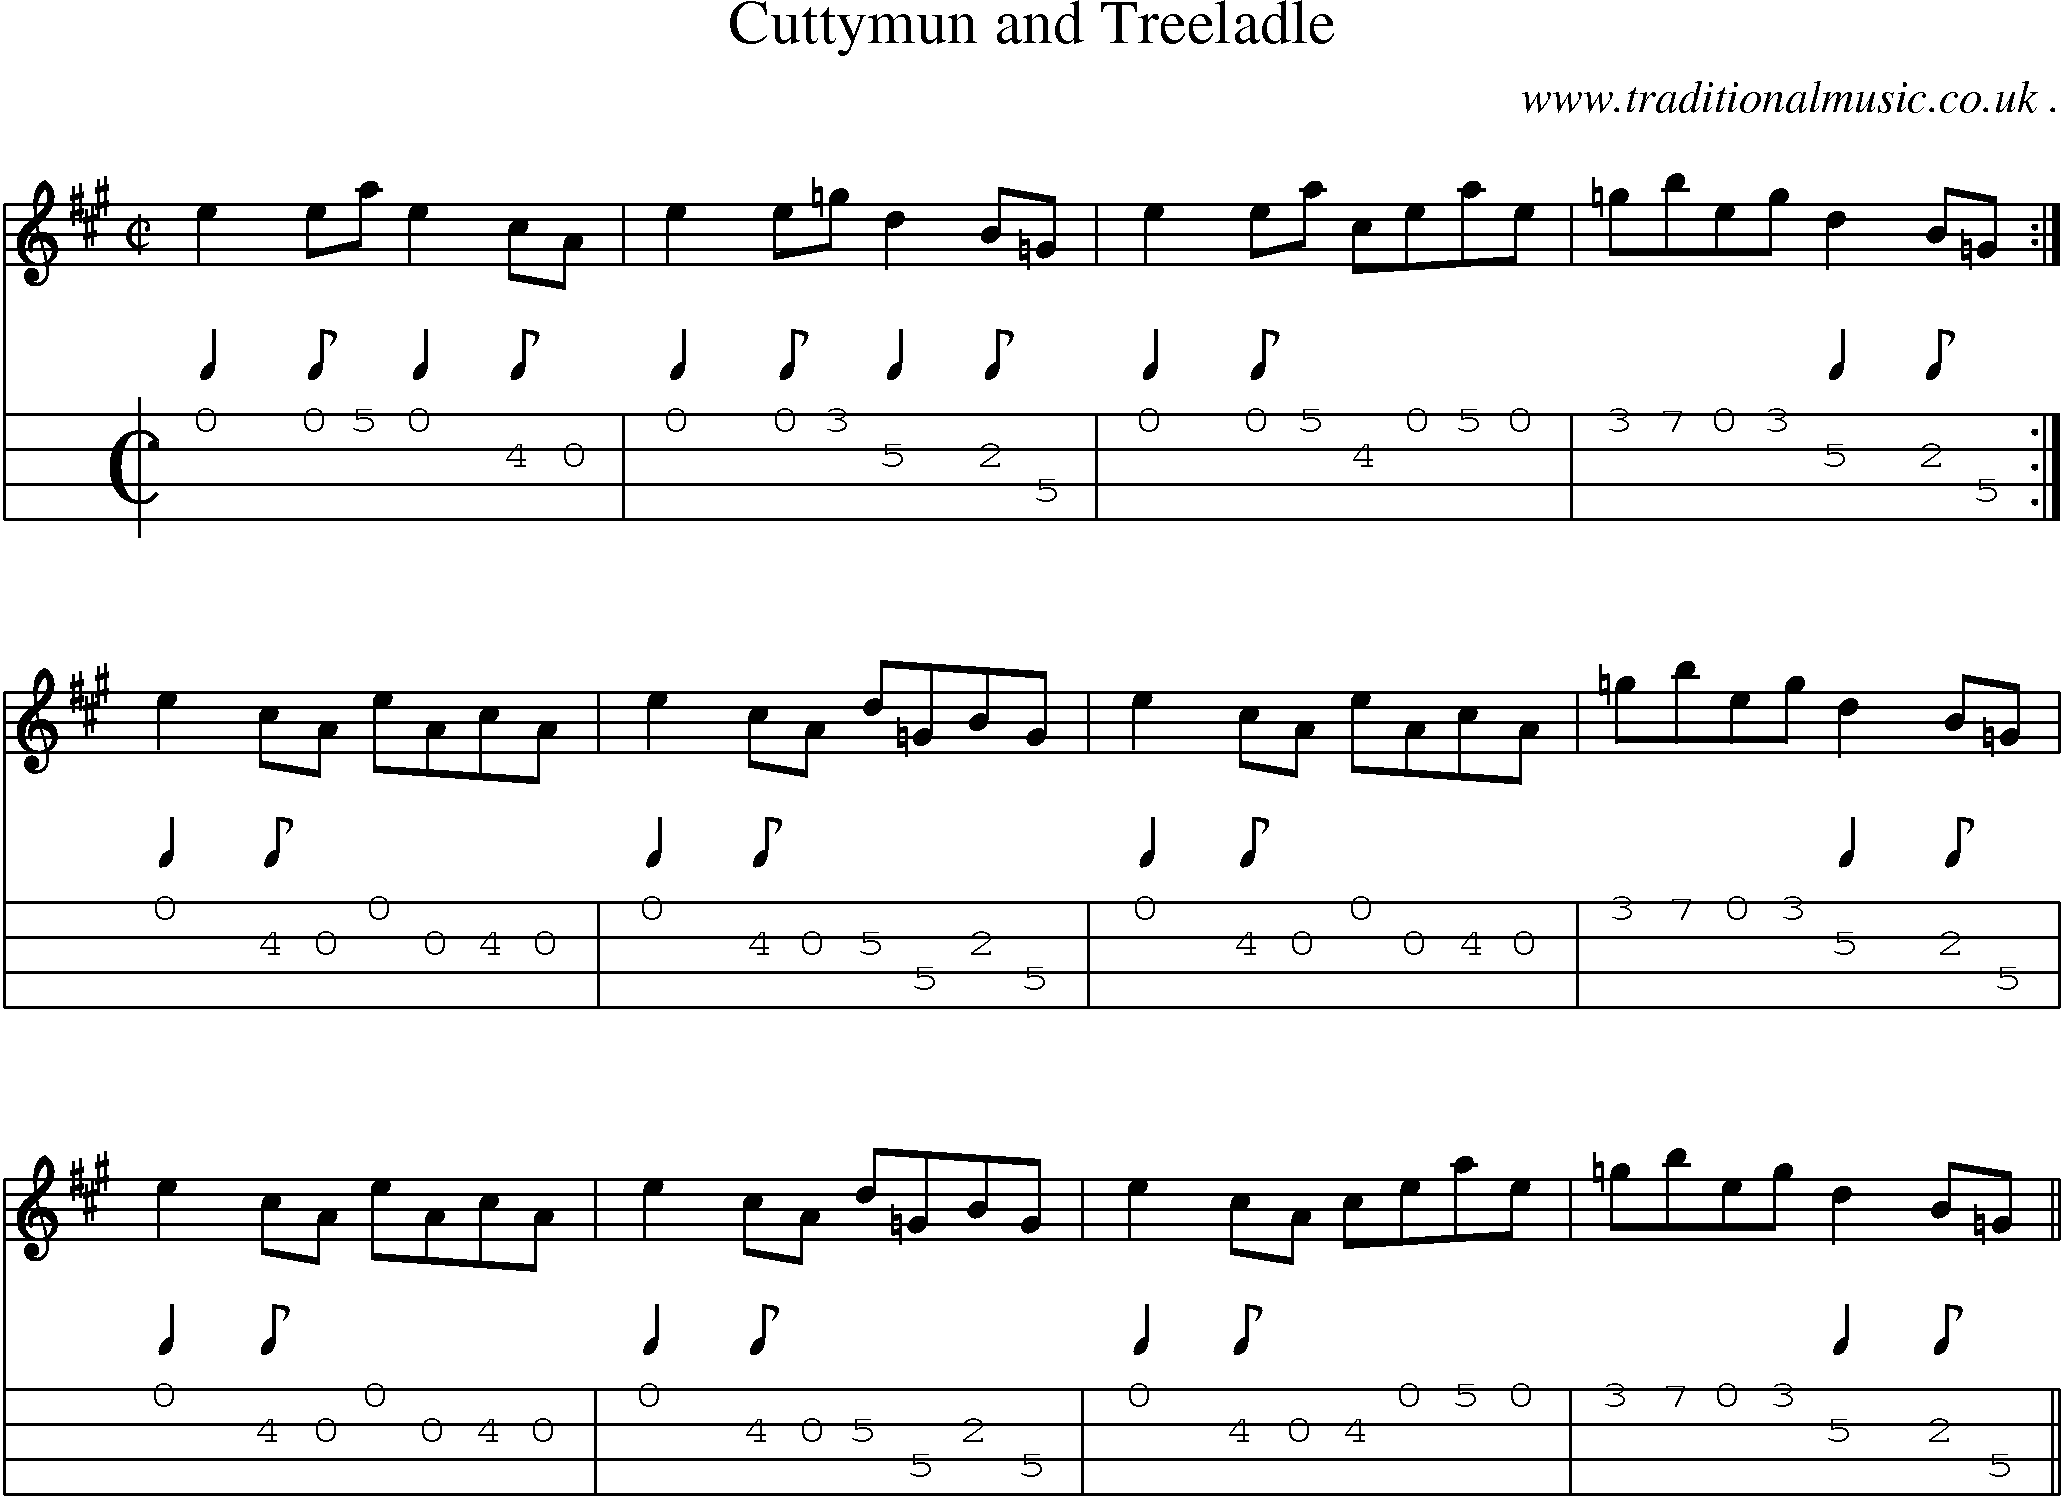 Sheet-music  score, Chords and Mandolin Tabs for Cuttymun And Treeladle